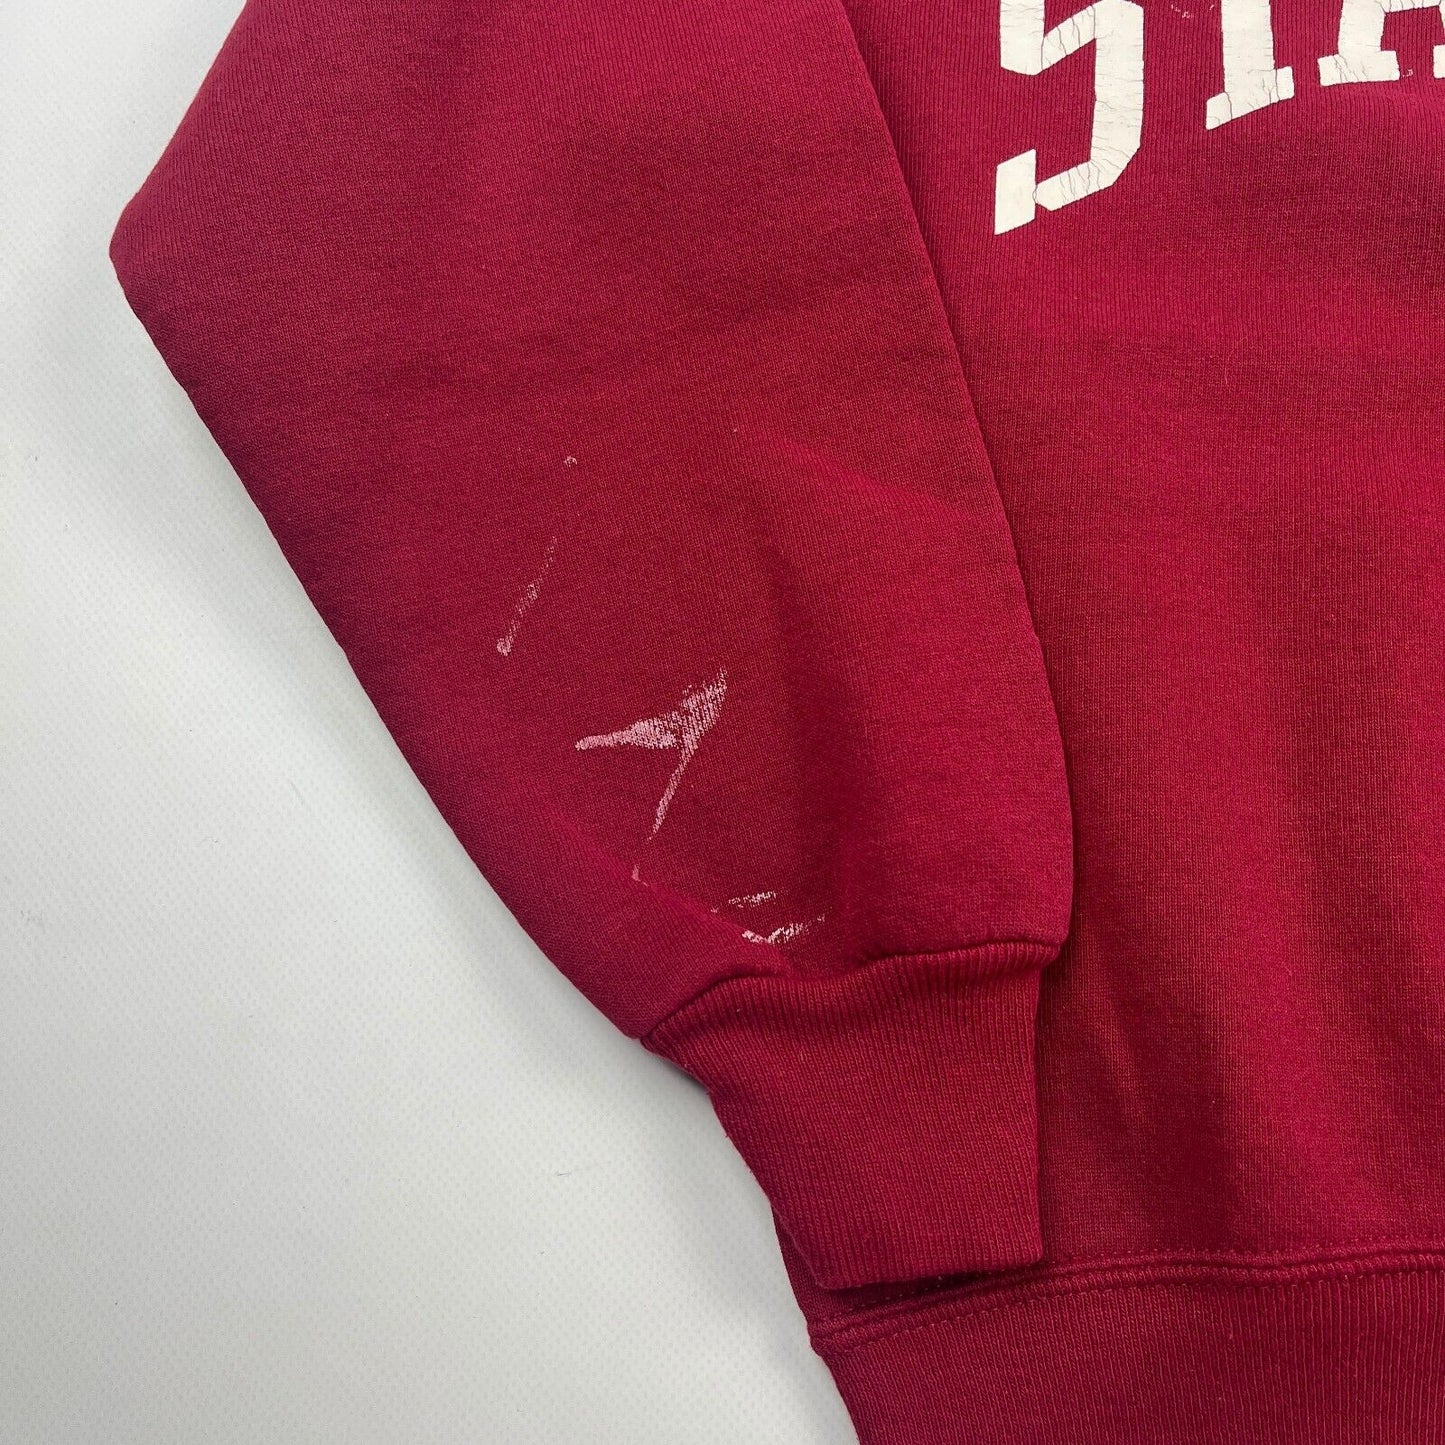 VINTAGE 90s Stanford Russell Athletic Red Crewneck Sweater sz Small Men